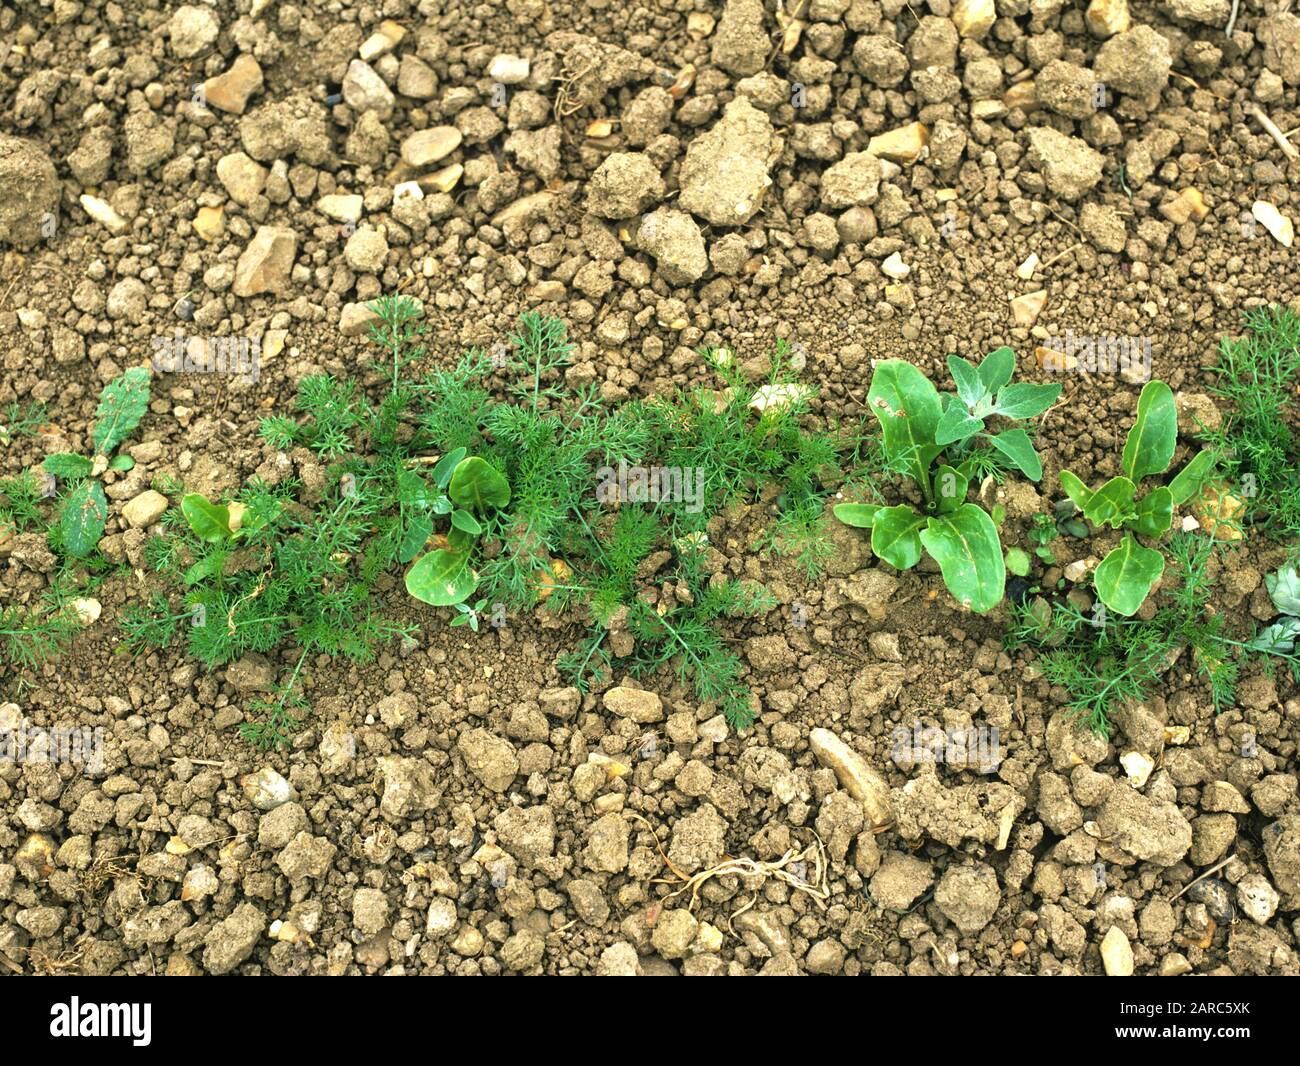 Seedling scentless mayweed (Tripleurospermum inodorum) and other broad-leaved weeds  in a seedlng sugar beet row after interrow cultivation Stock Photo